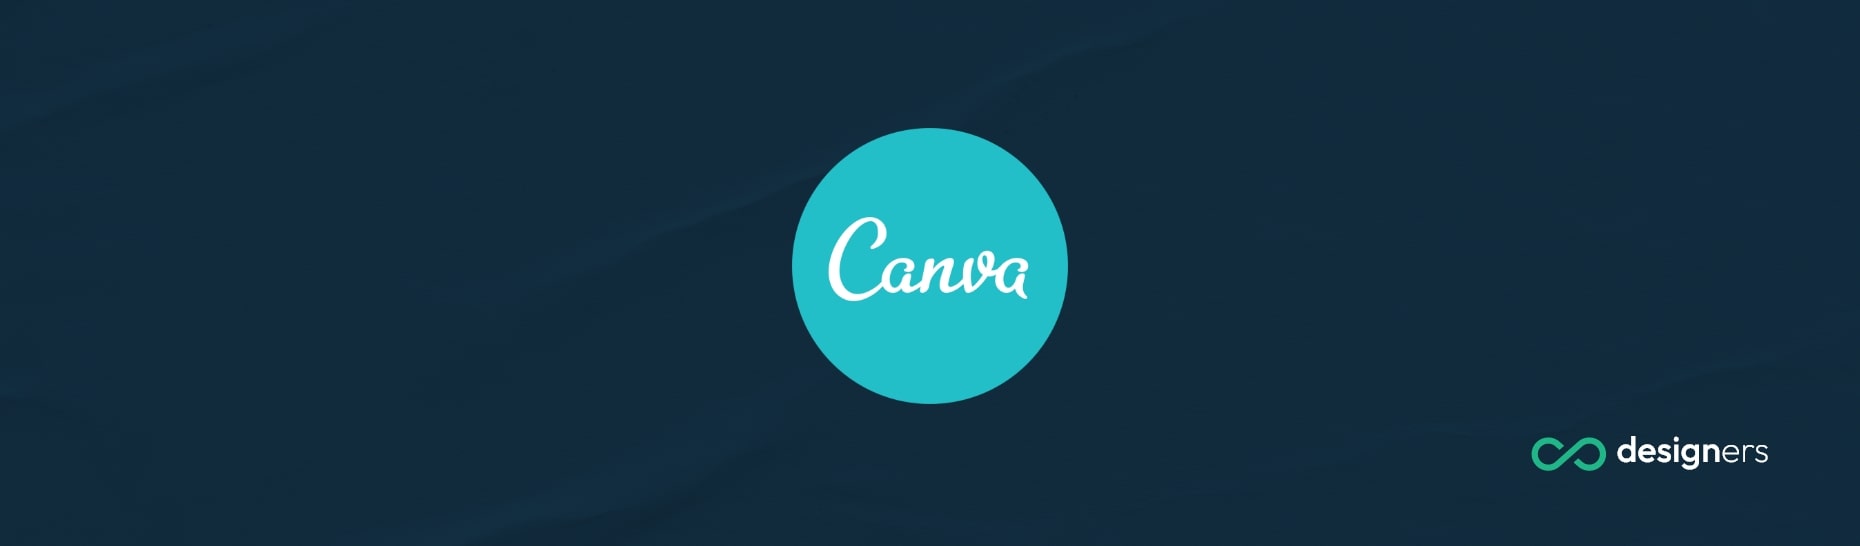 Is Canva Good for Wireframes?